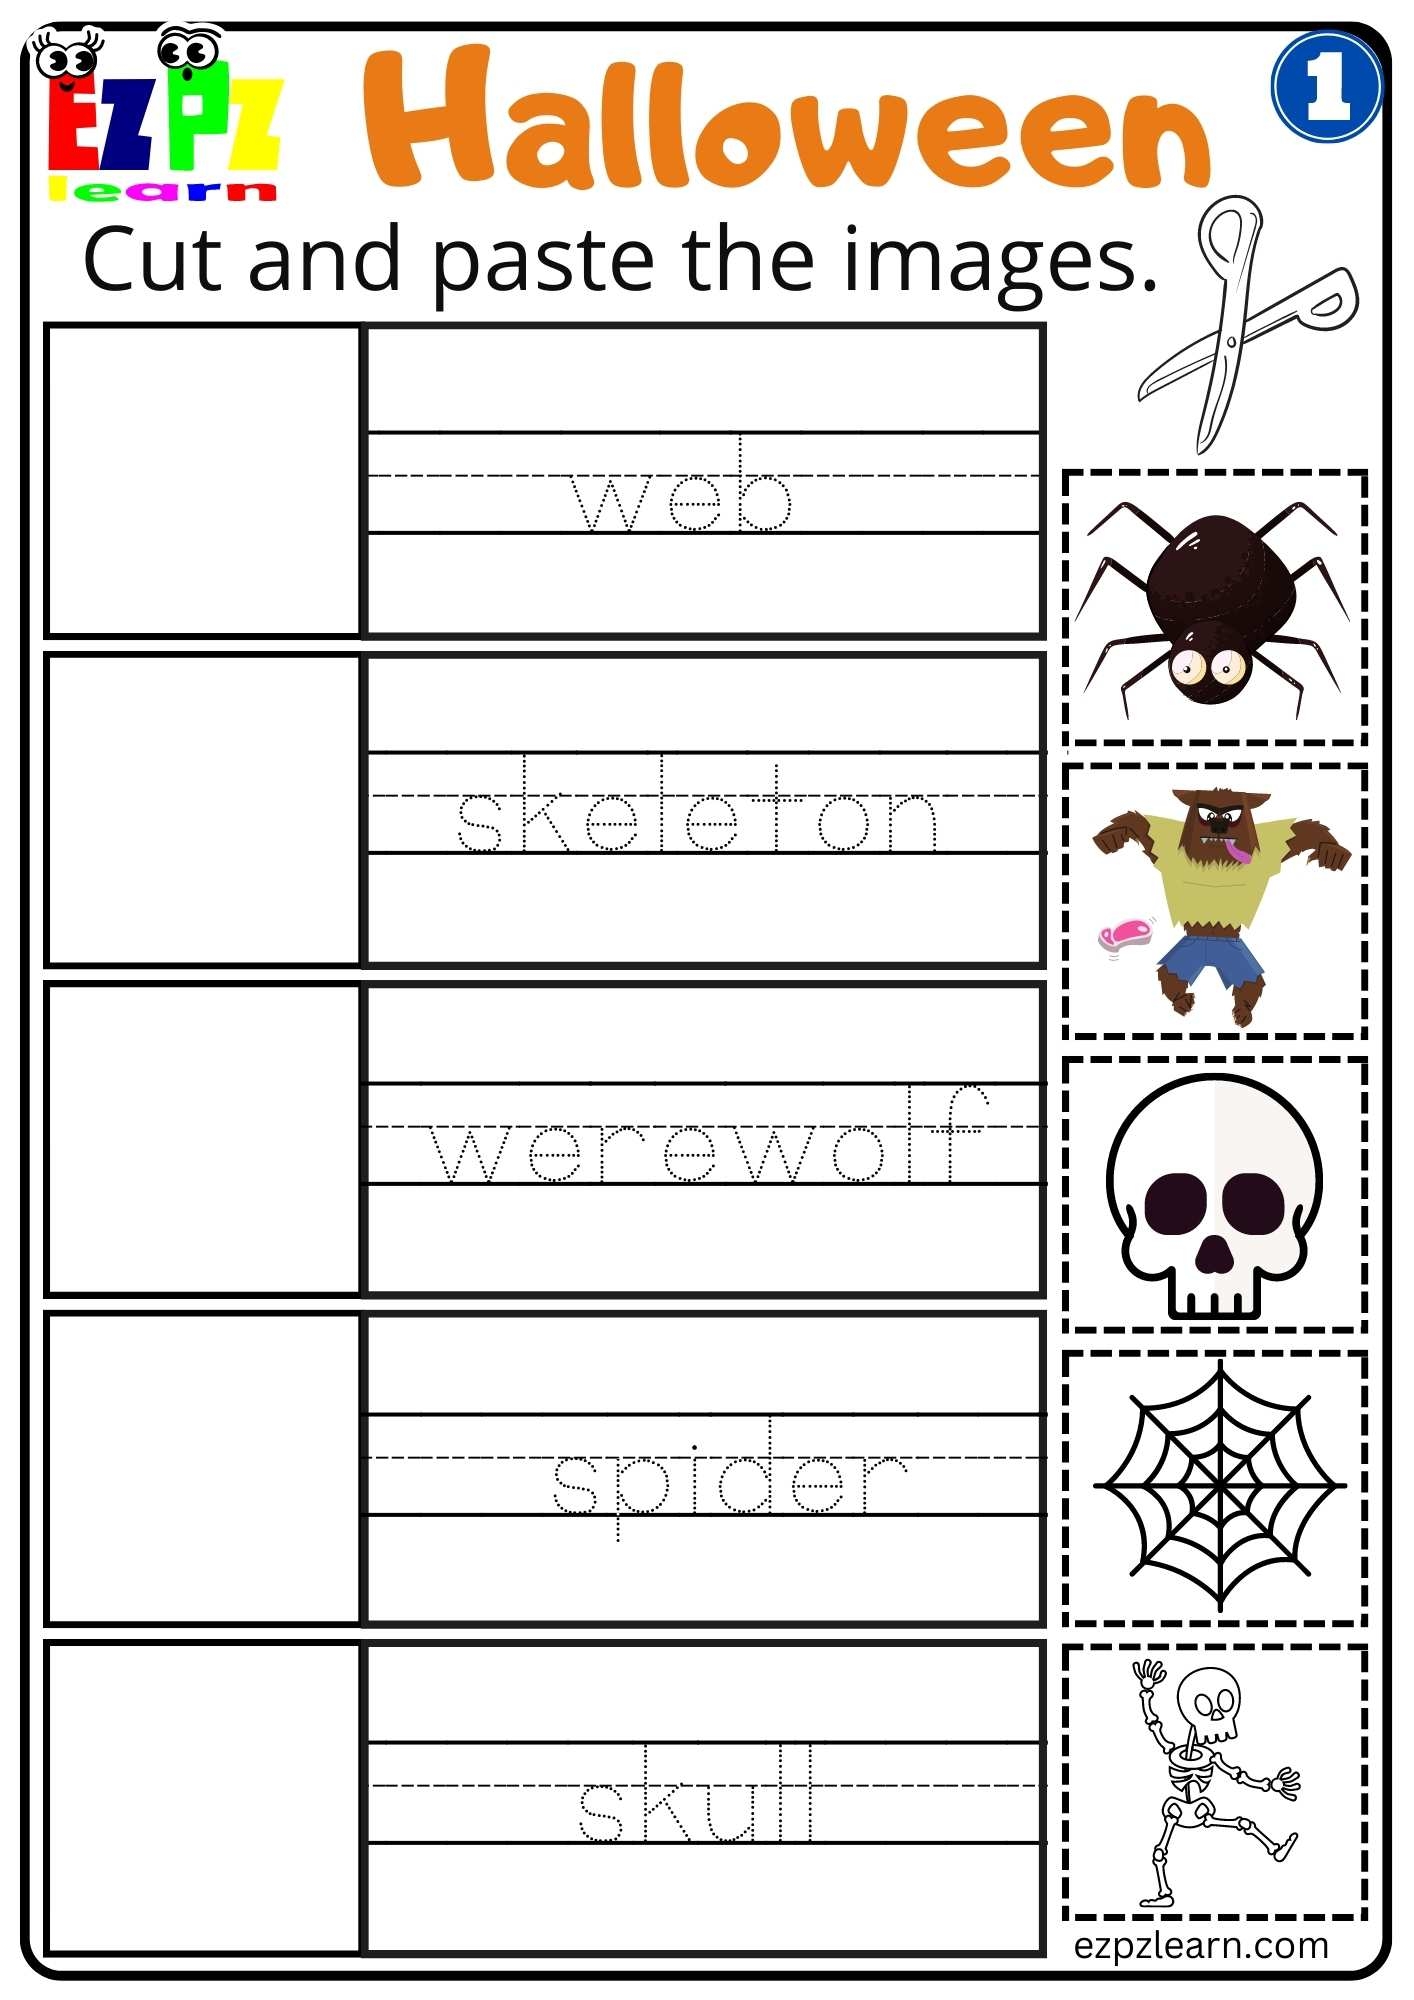 Group 1 Halloween Cut And Paste Worksheet For Kids Free PDF Download Ezpzlearn